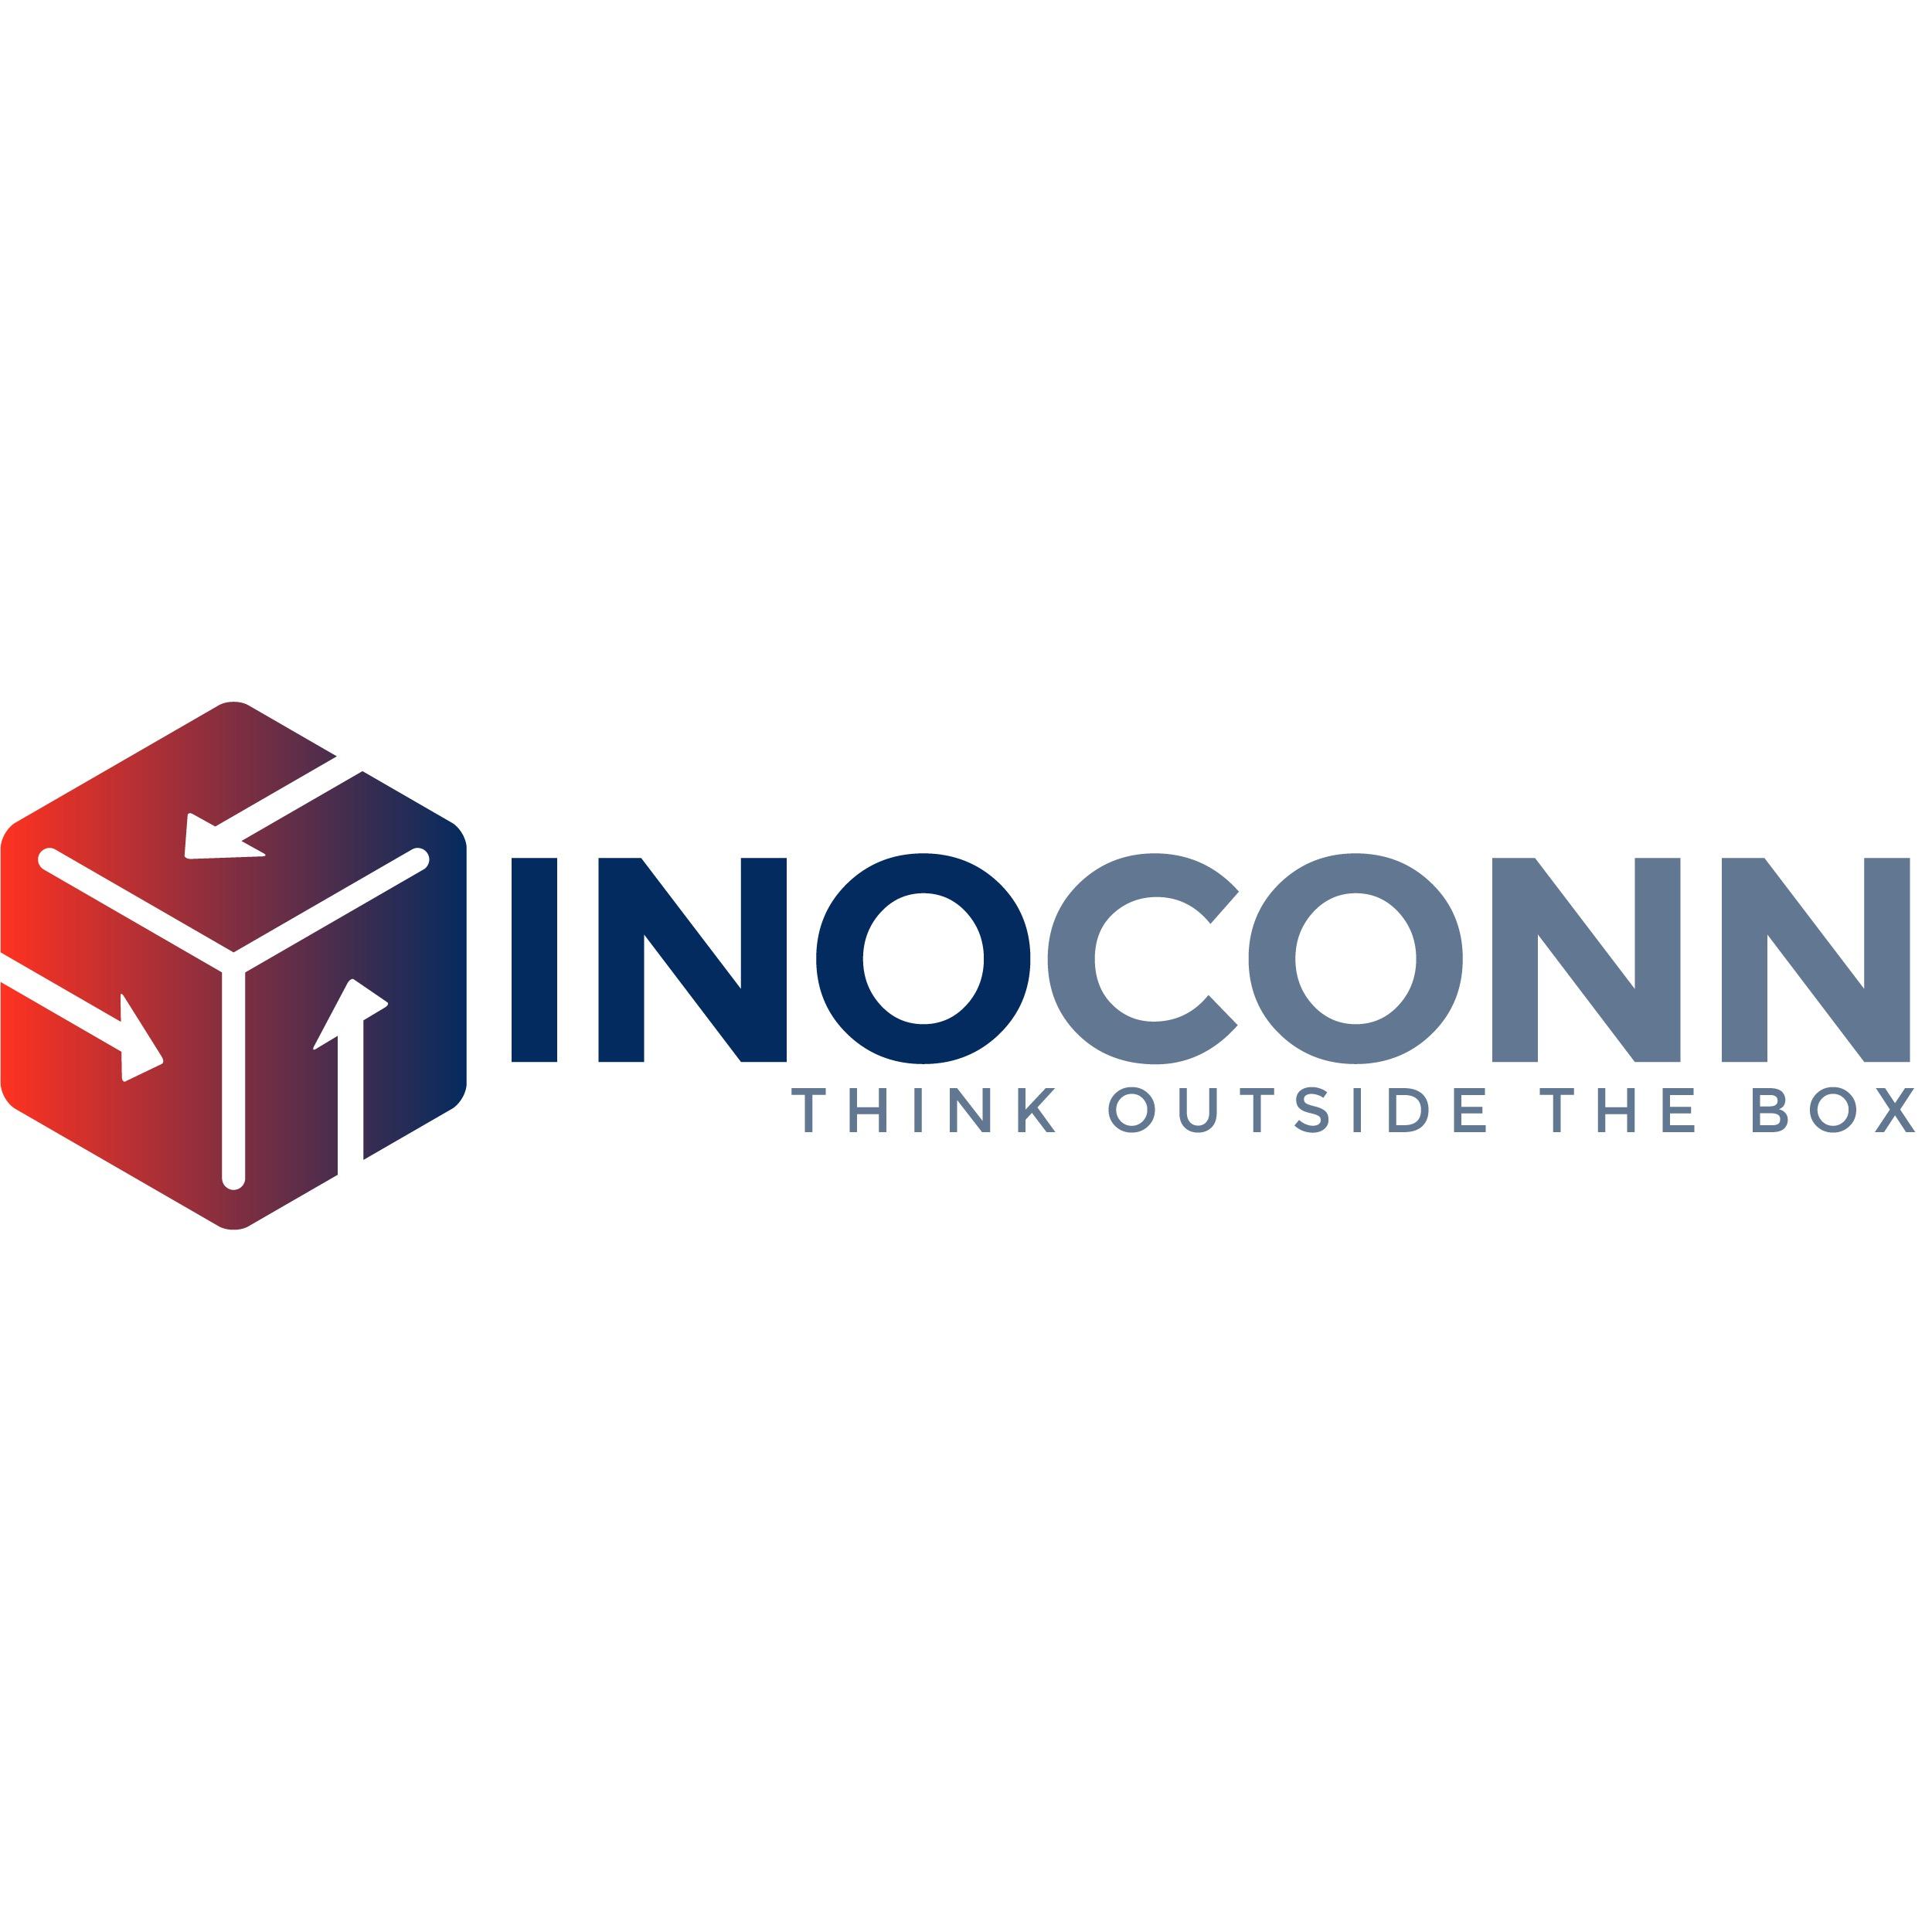 Inoconn - Managed IT Services for Small Business Photo